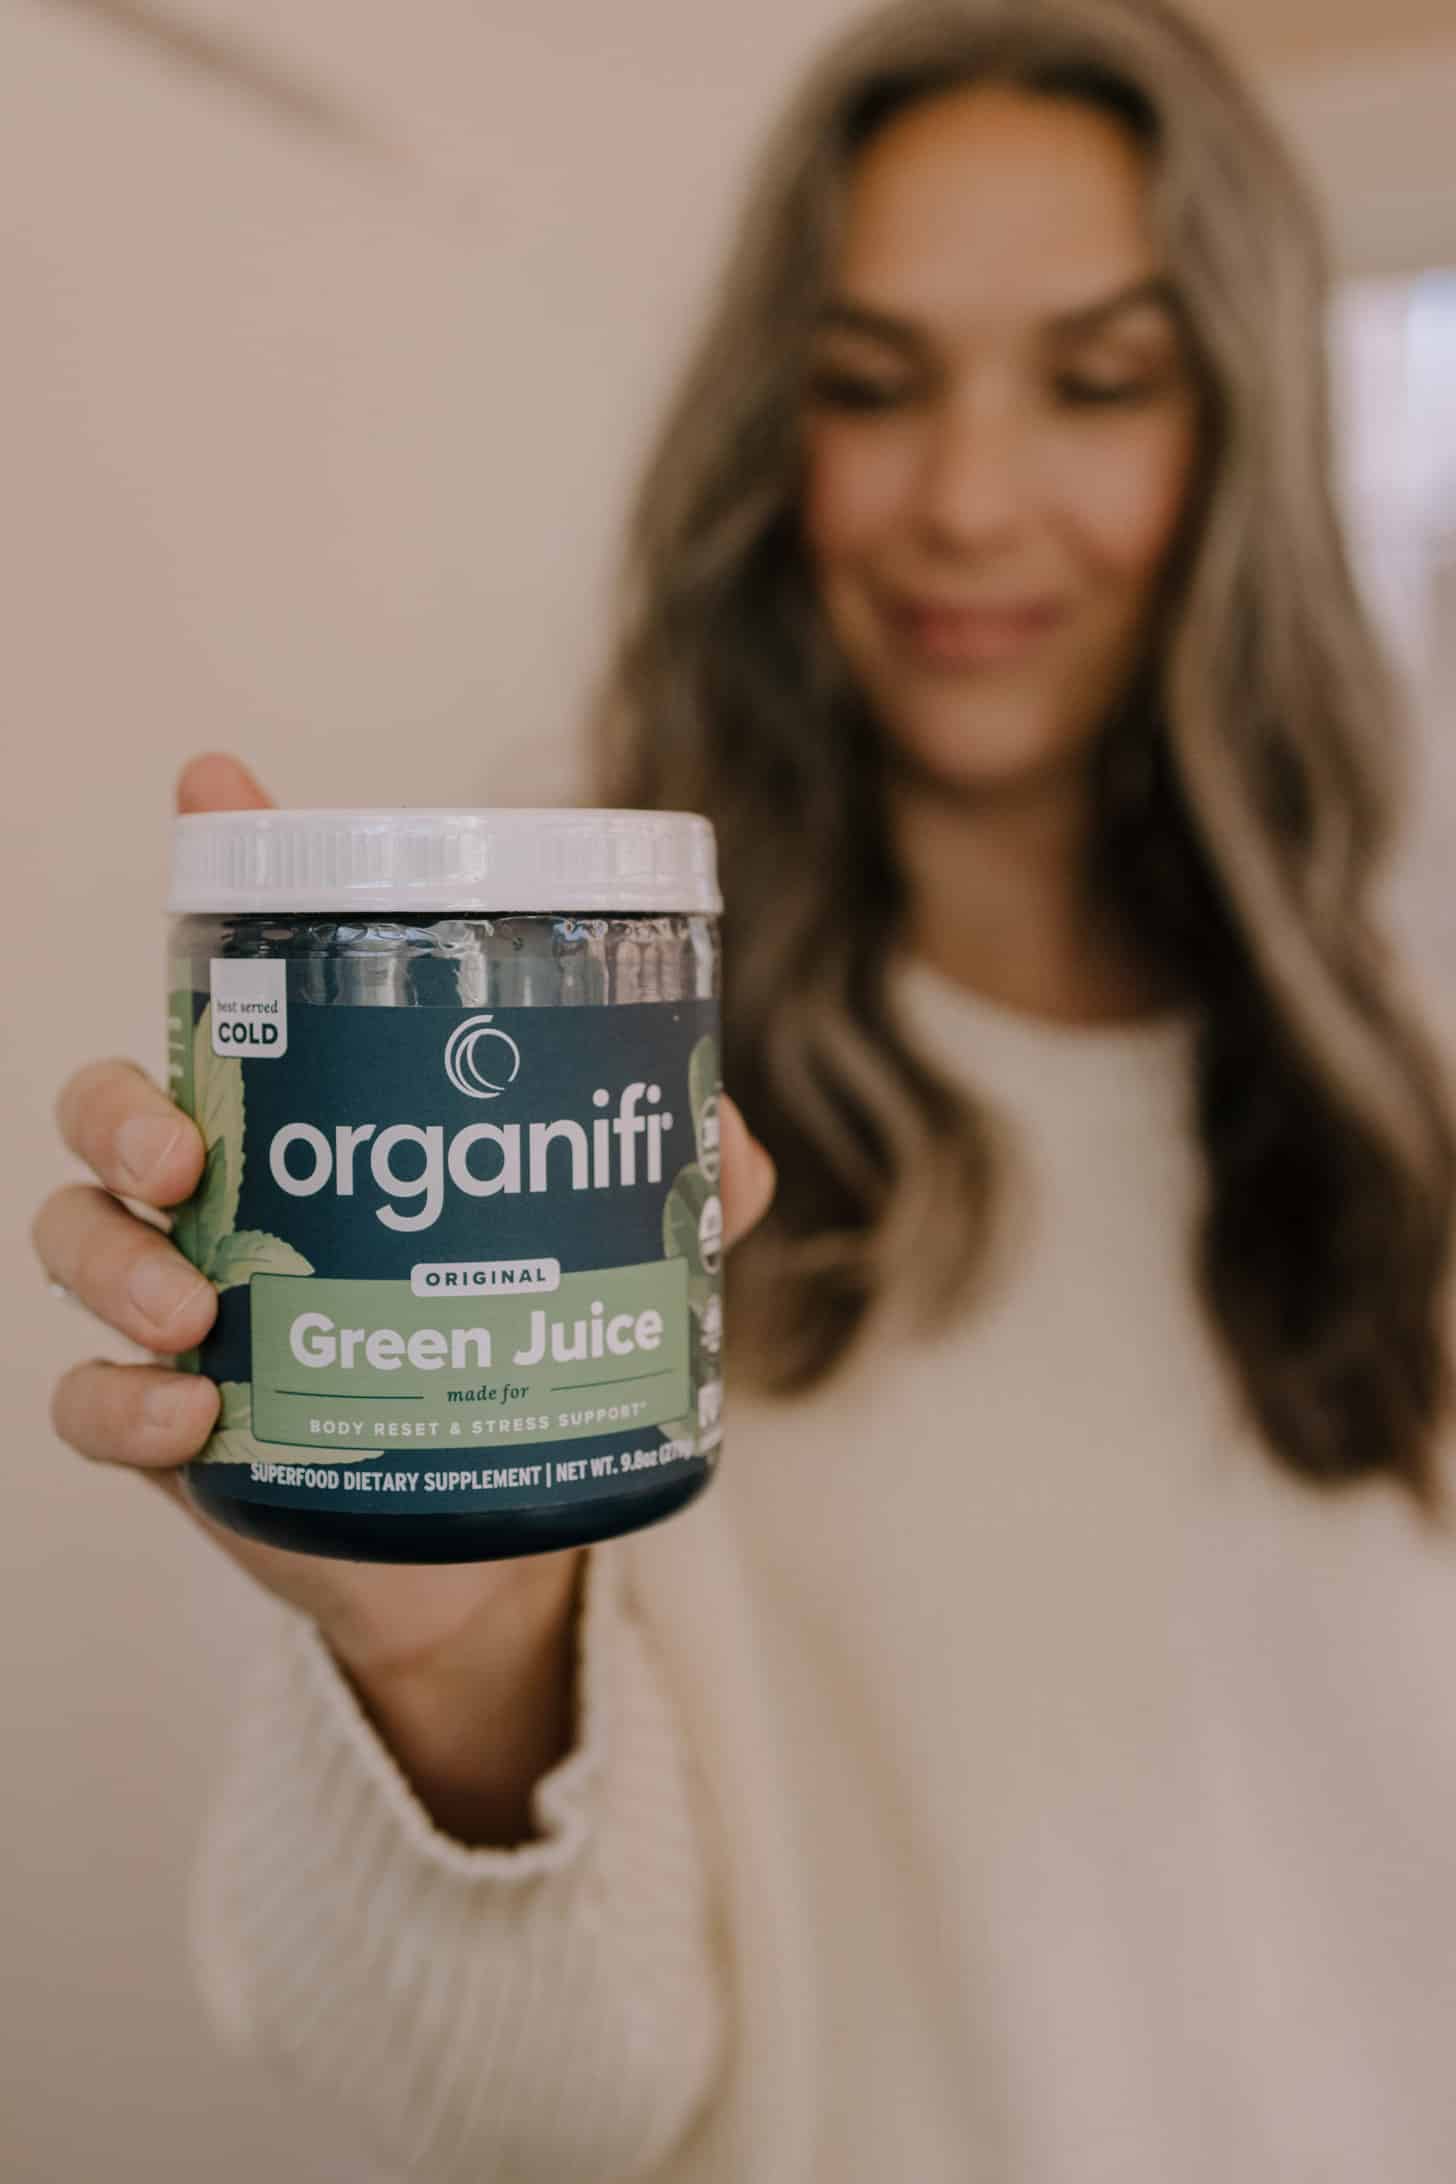 Is Organifi Green Juice The Best? Vs. 3 Other Juices - The Facts